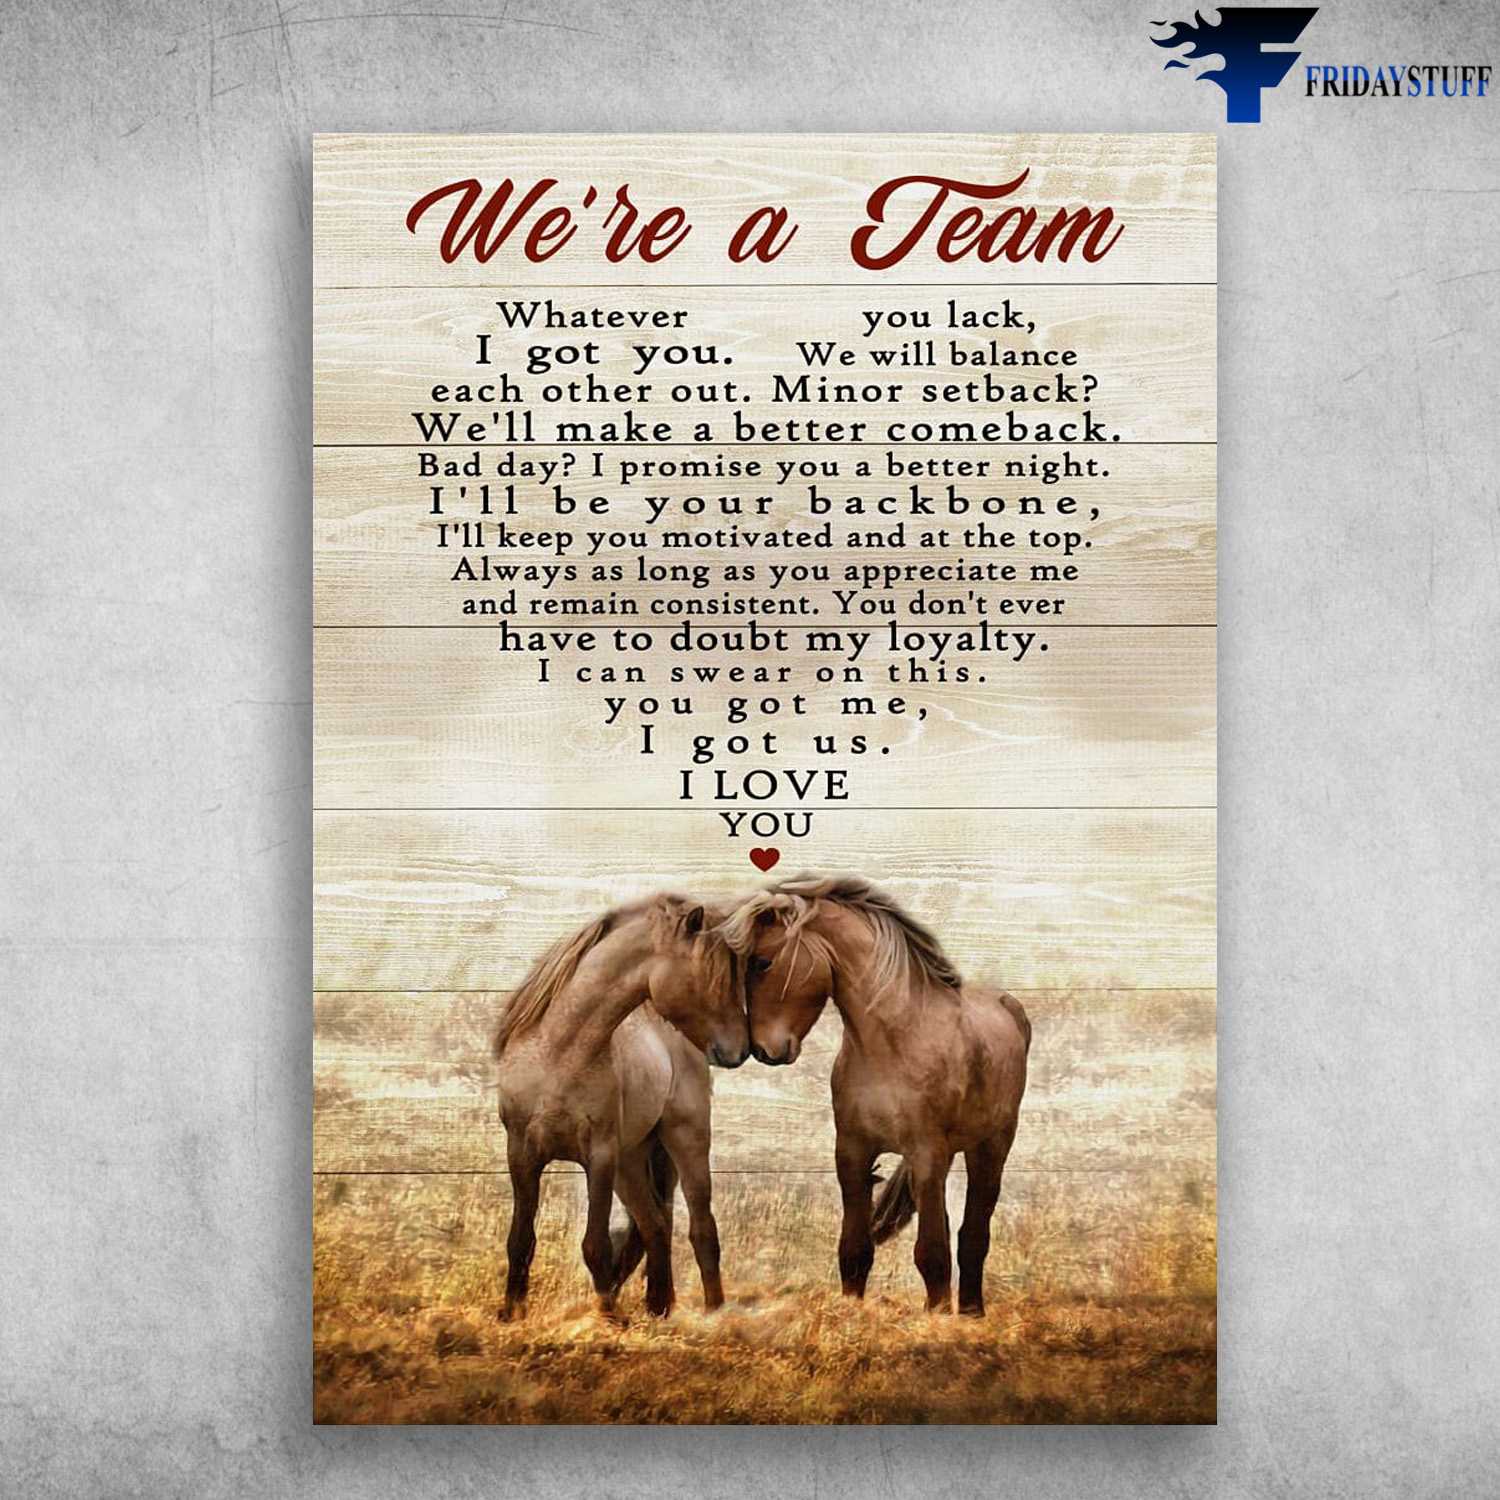 Horse Couple, Love Poster, We're A Team, Whatever You Lack, I Got You, We Will Balance Each Other Out, Minor Setback, Guess We'll Make A Major, Comeback Bad Day